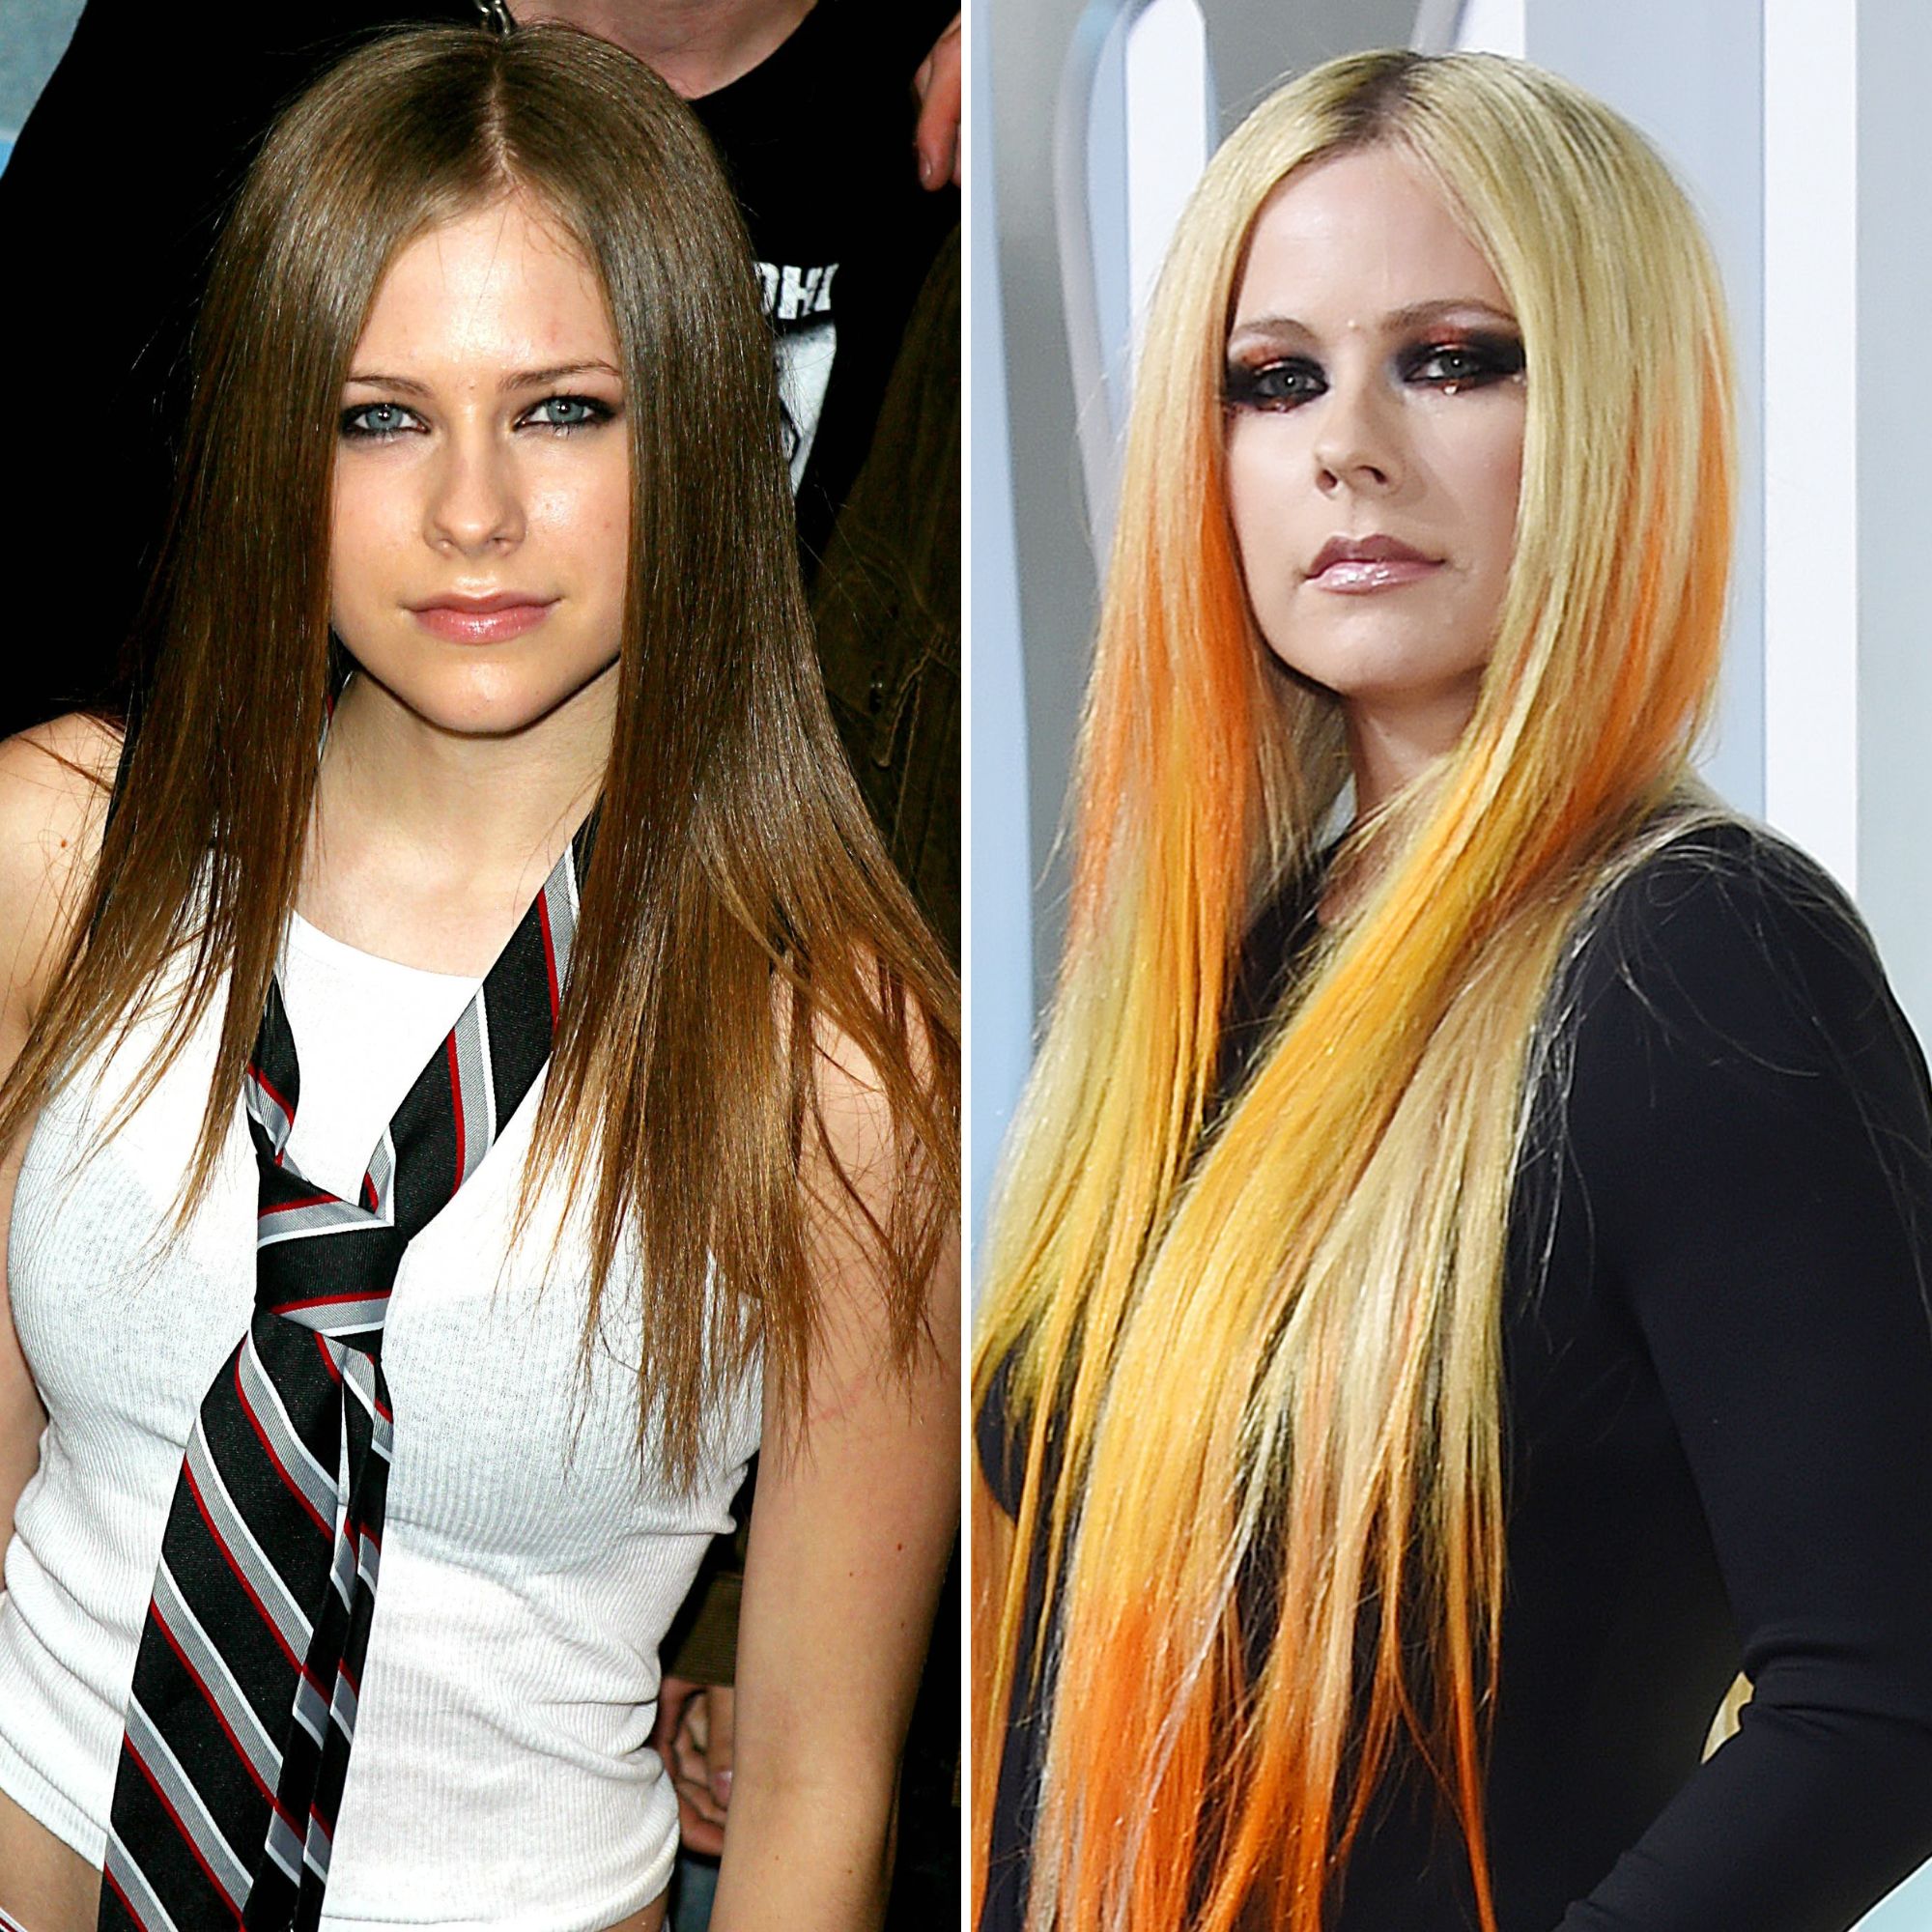 Avril Lavigne Upskirt - Avril Lavigne's Transformation From 2002 to Today: Photos